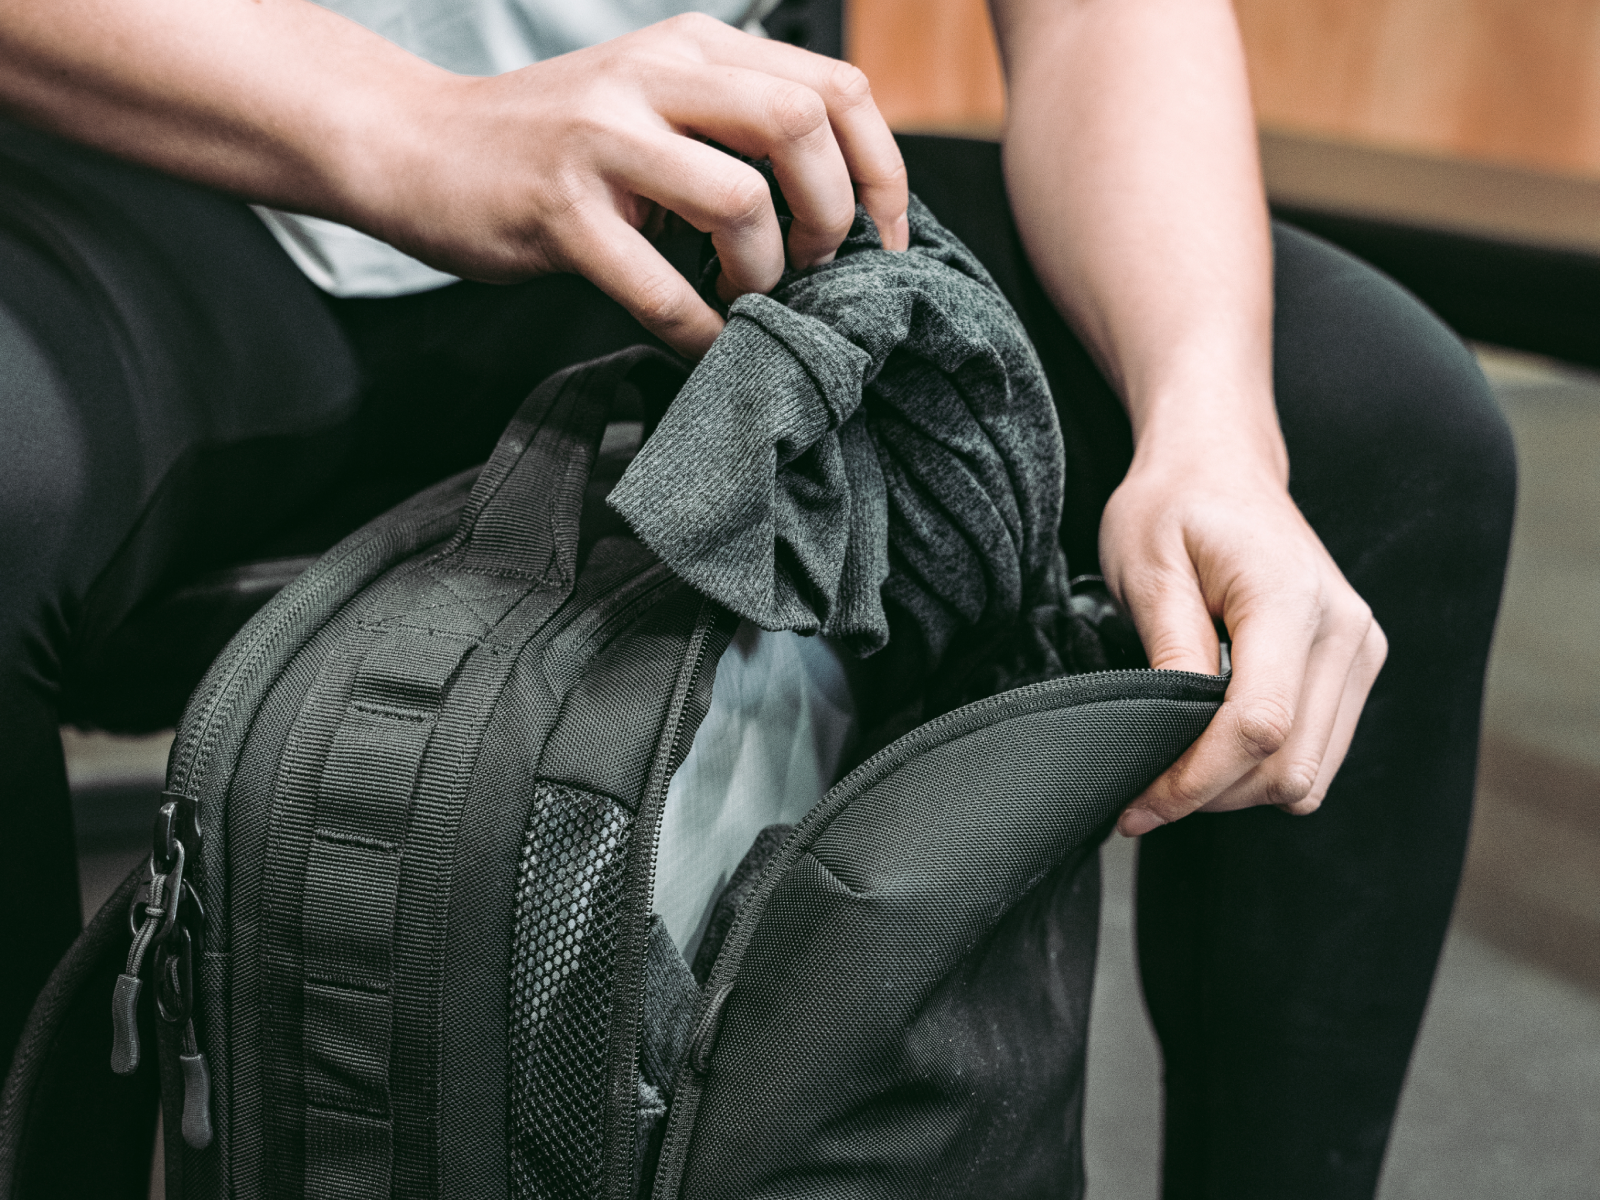 Haven X CrossFit  The Small Backpack - Organized Gym Bag